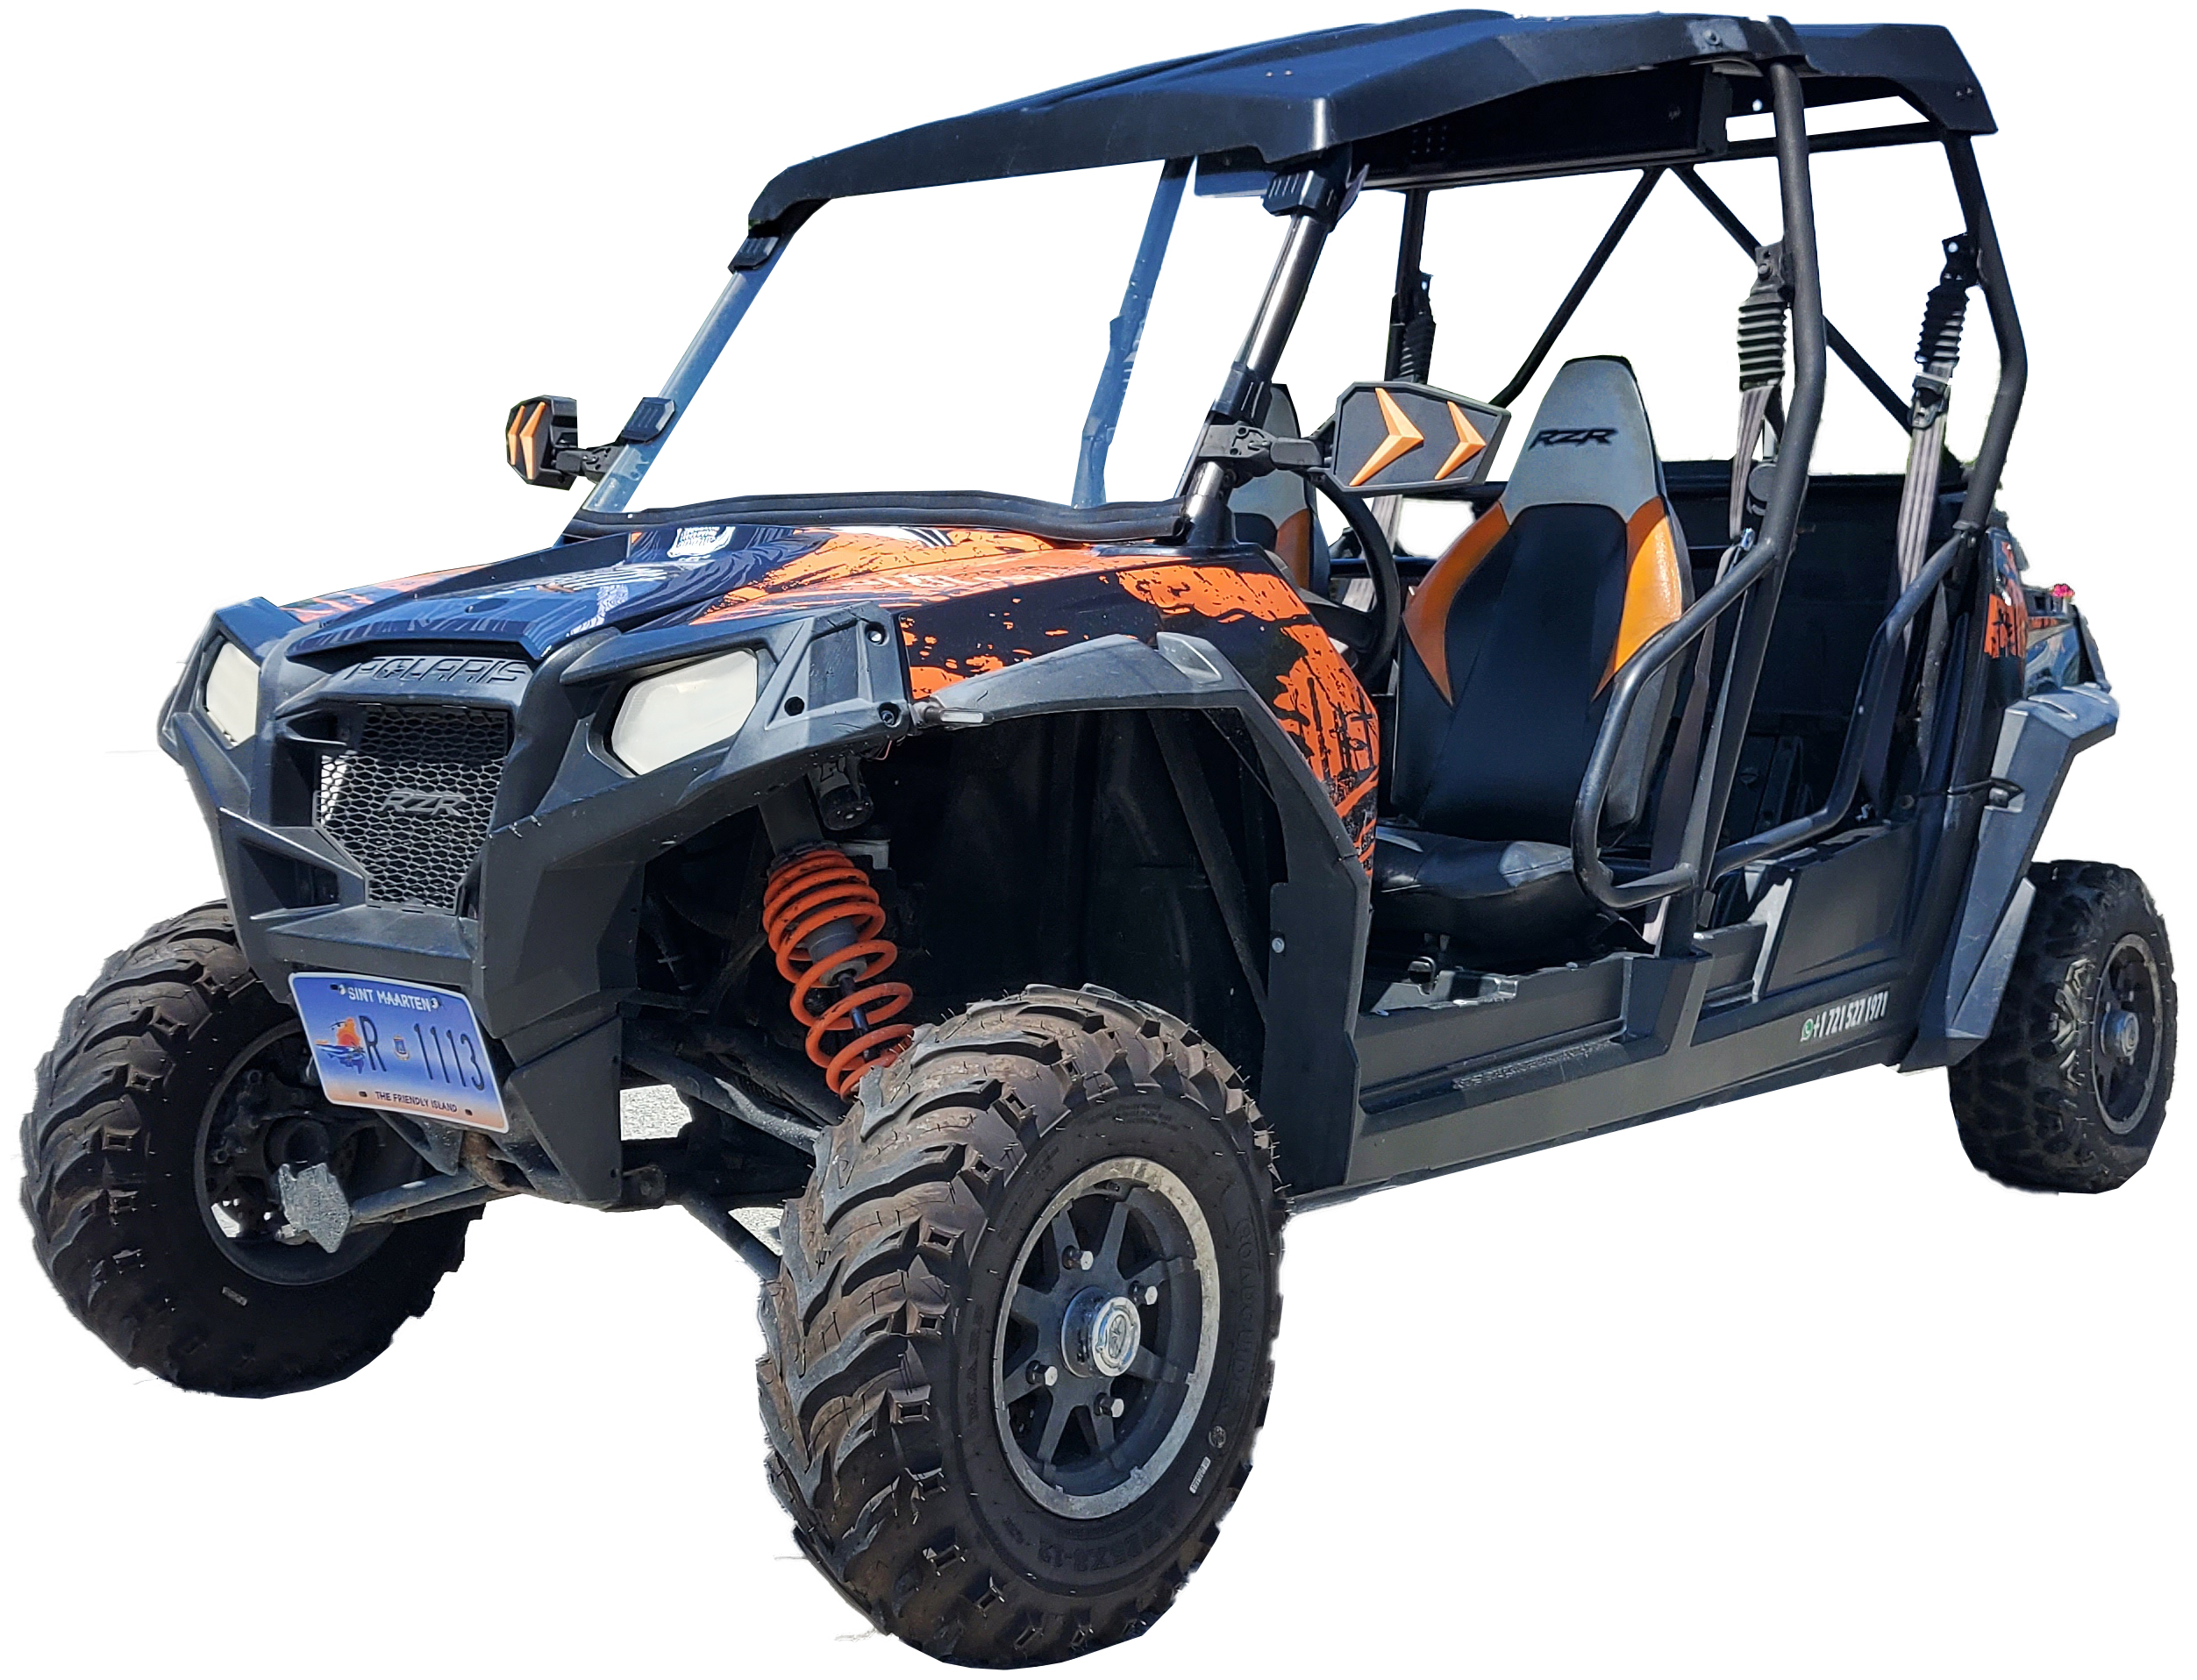 ATV-Buggy-UTV-scooter-rental-tour-tours-sxm-philipsburg-maho-side-by-side-excursion-guided-tour-tour-guide-ST MAARTEN-ST MARTIN 2